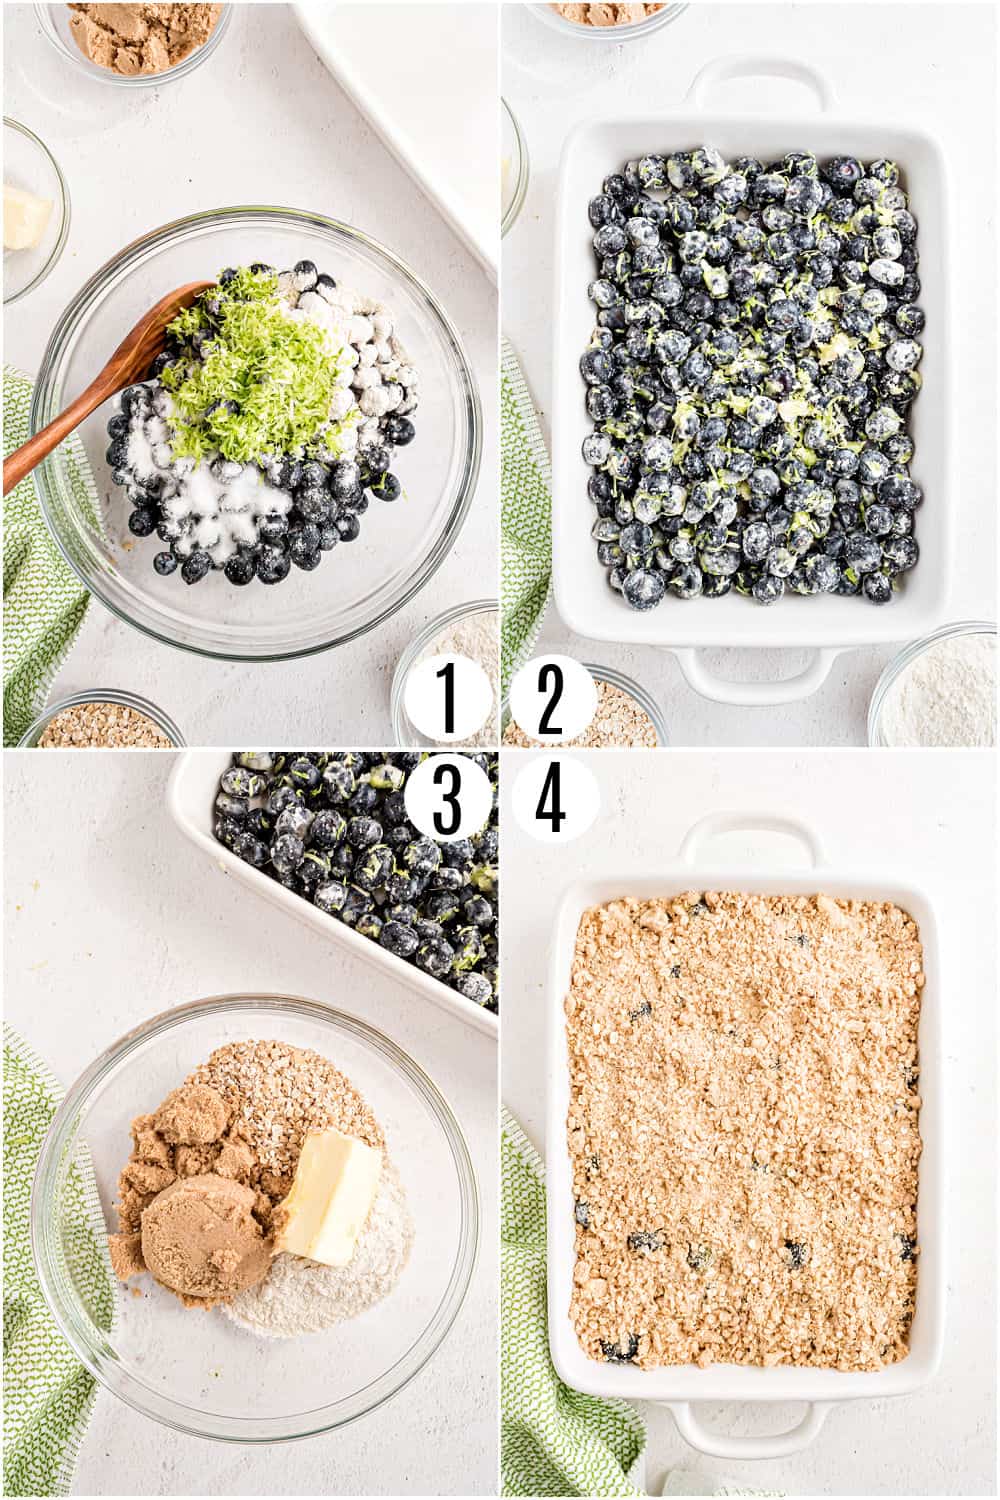 Step by step photos showing how to make a blueberry crumble.